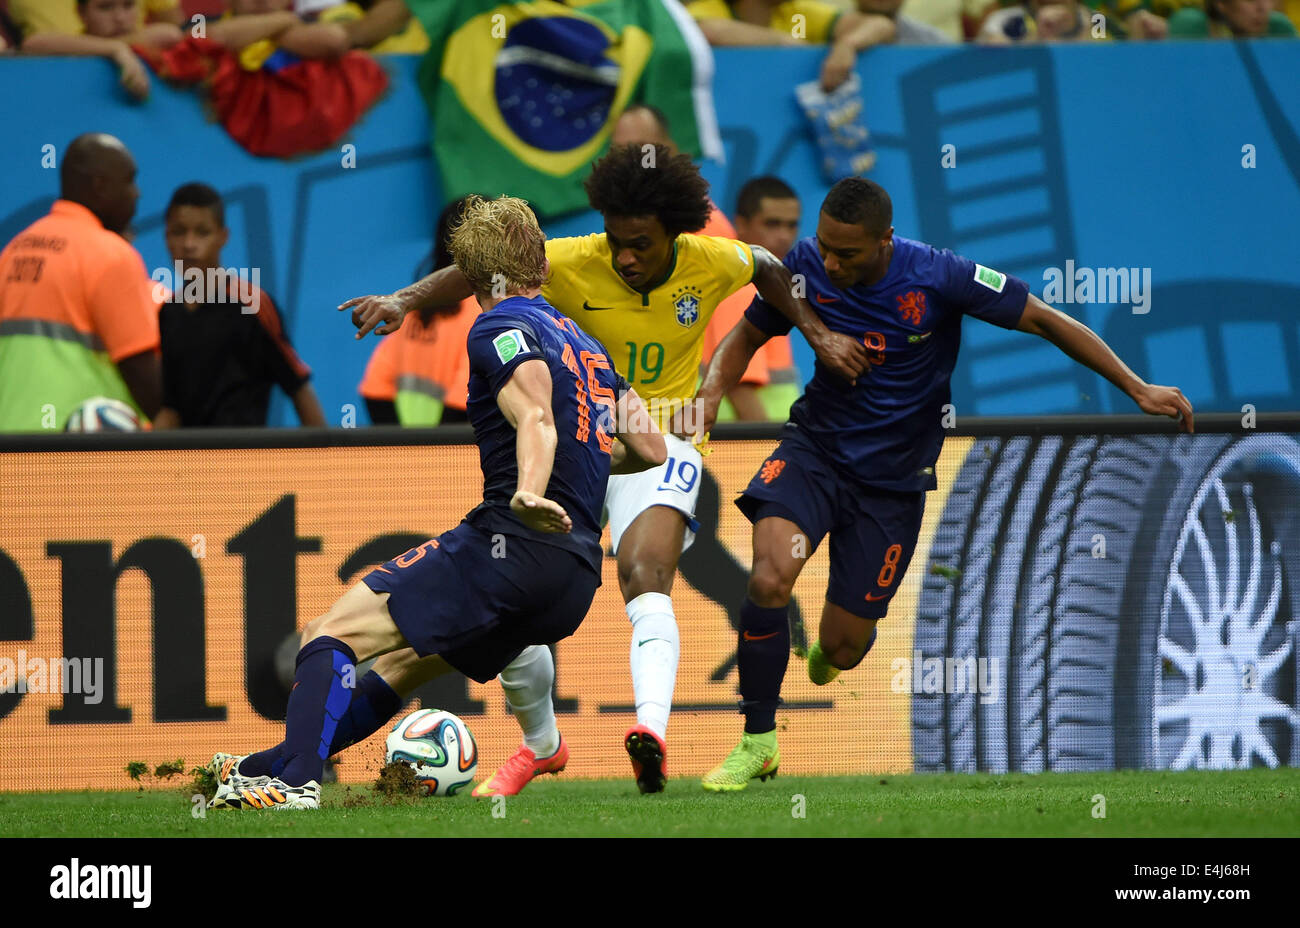 Brasilia, Brazil. 12th July, 2014. Netherlands' Dirk Kuyt (L) and Jonathan De Guzman (R) defend against Brazil's Willian during the third place play-off match between Brazil and Netherlands of 2014 FIFA World Cup at the Estadio Nacional Stadium in Brasilia, Brazil, on July 12, 2014. Netherlands won 3-0 over Brazil and took the third place of the tournament on Saturday. Credit:  Guo Yong/Xinhua/Alamy Live News Stock Photo